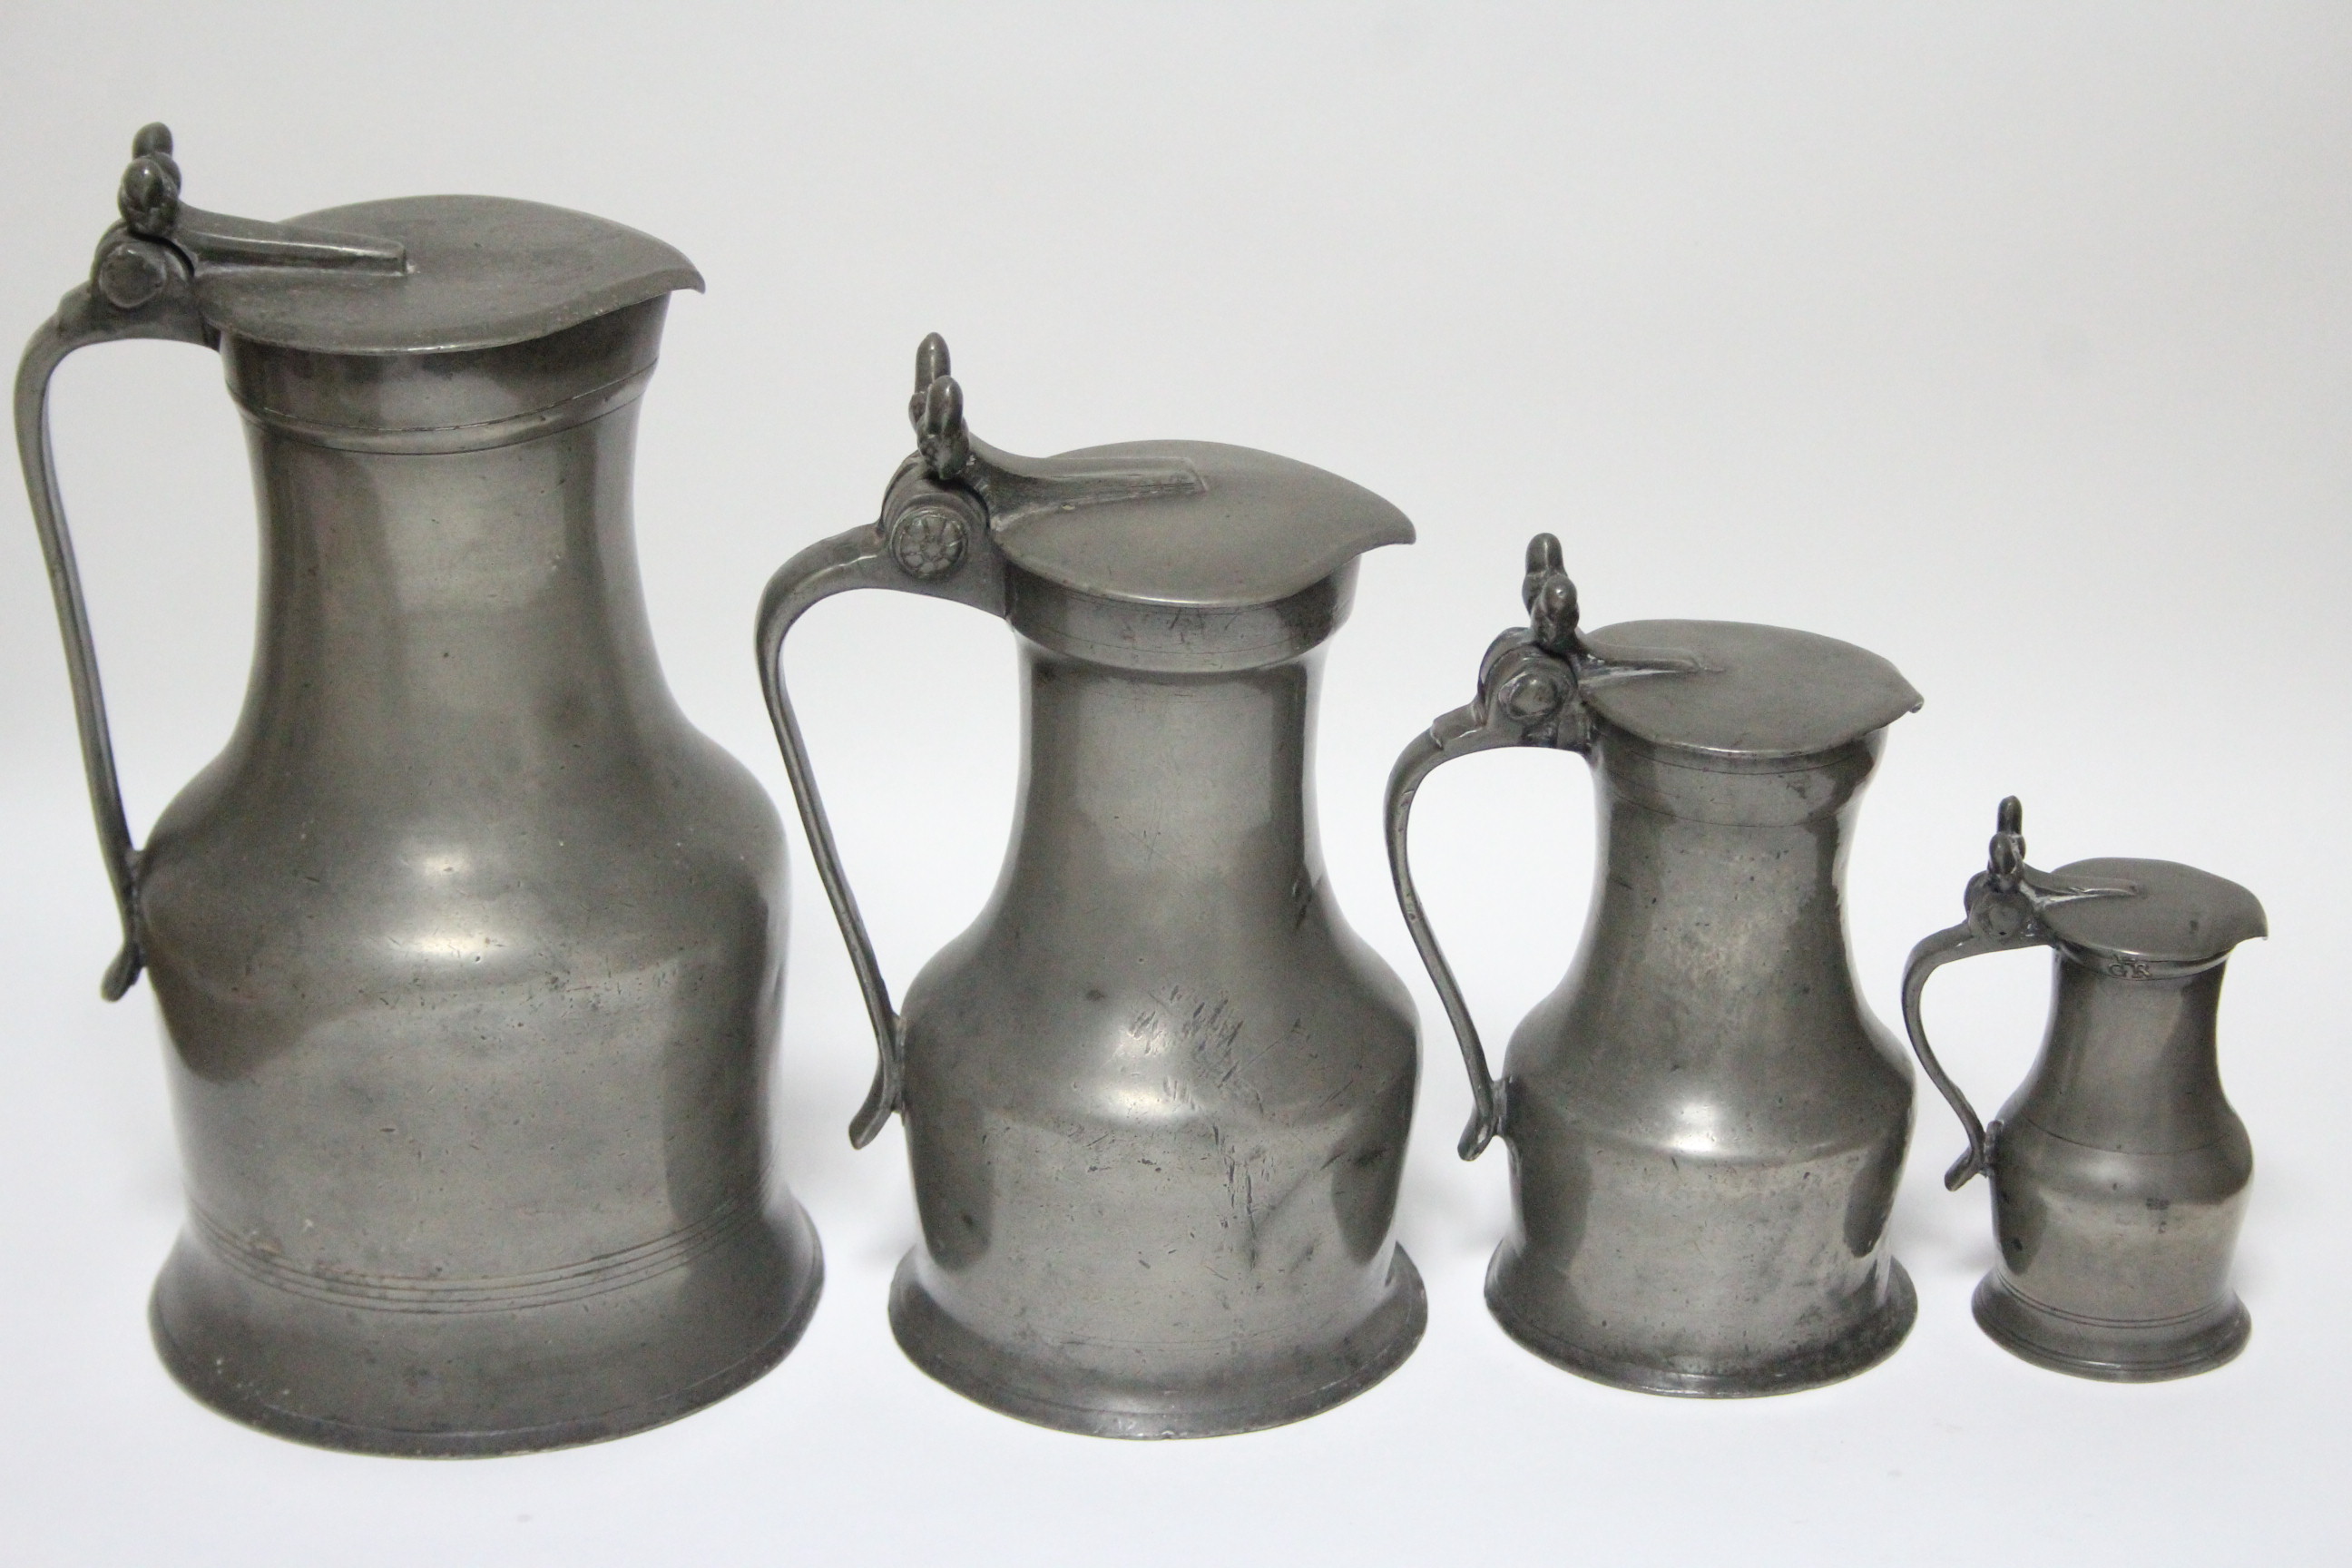 A matched set of four 19th century pewter graduated “Tappitt Hen” jugs, with double-acorn, thumb-